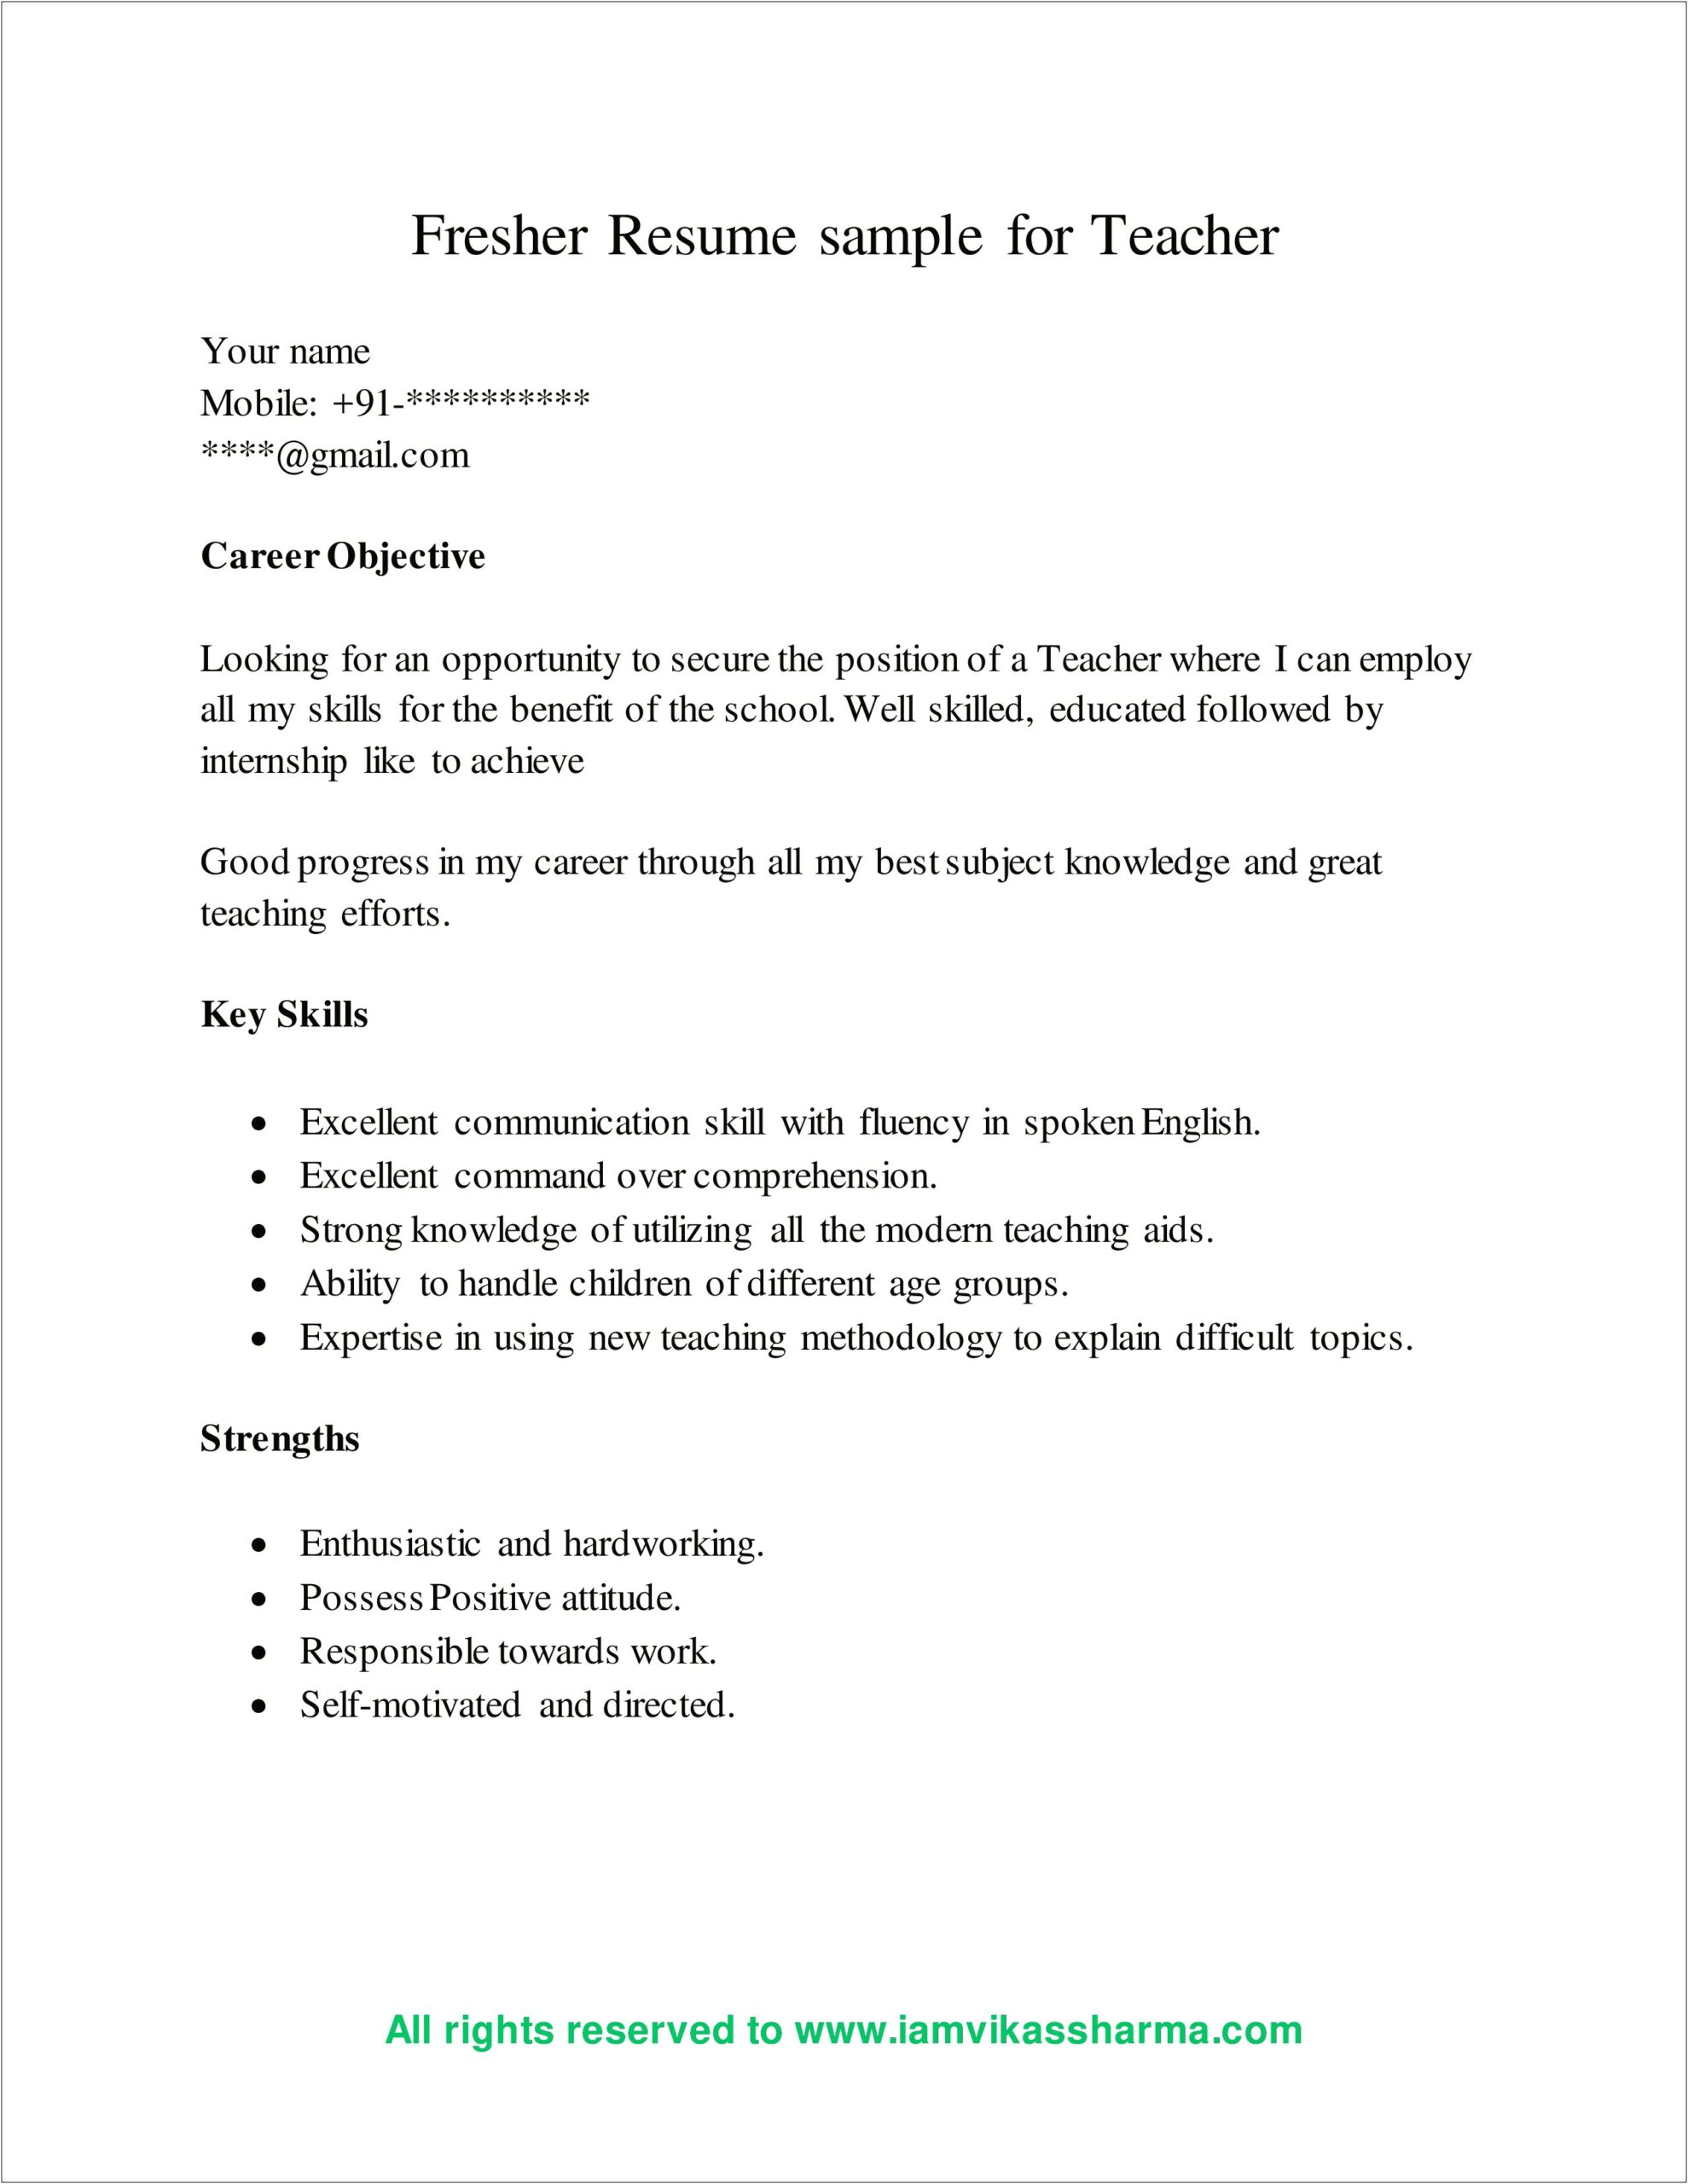 Changing Job Position Names On Resume